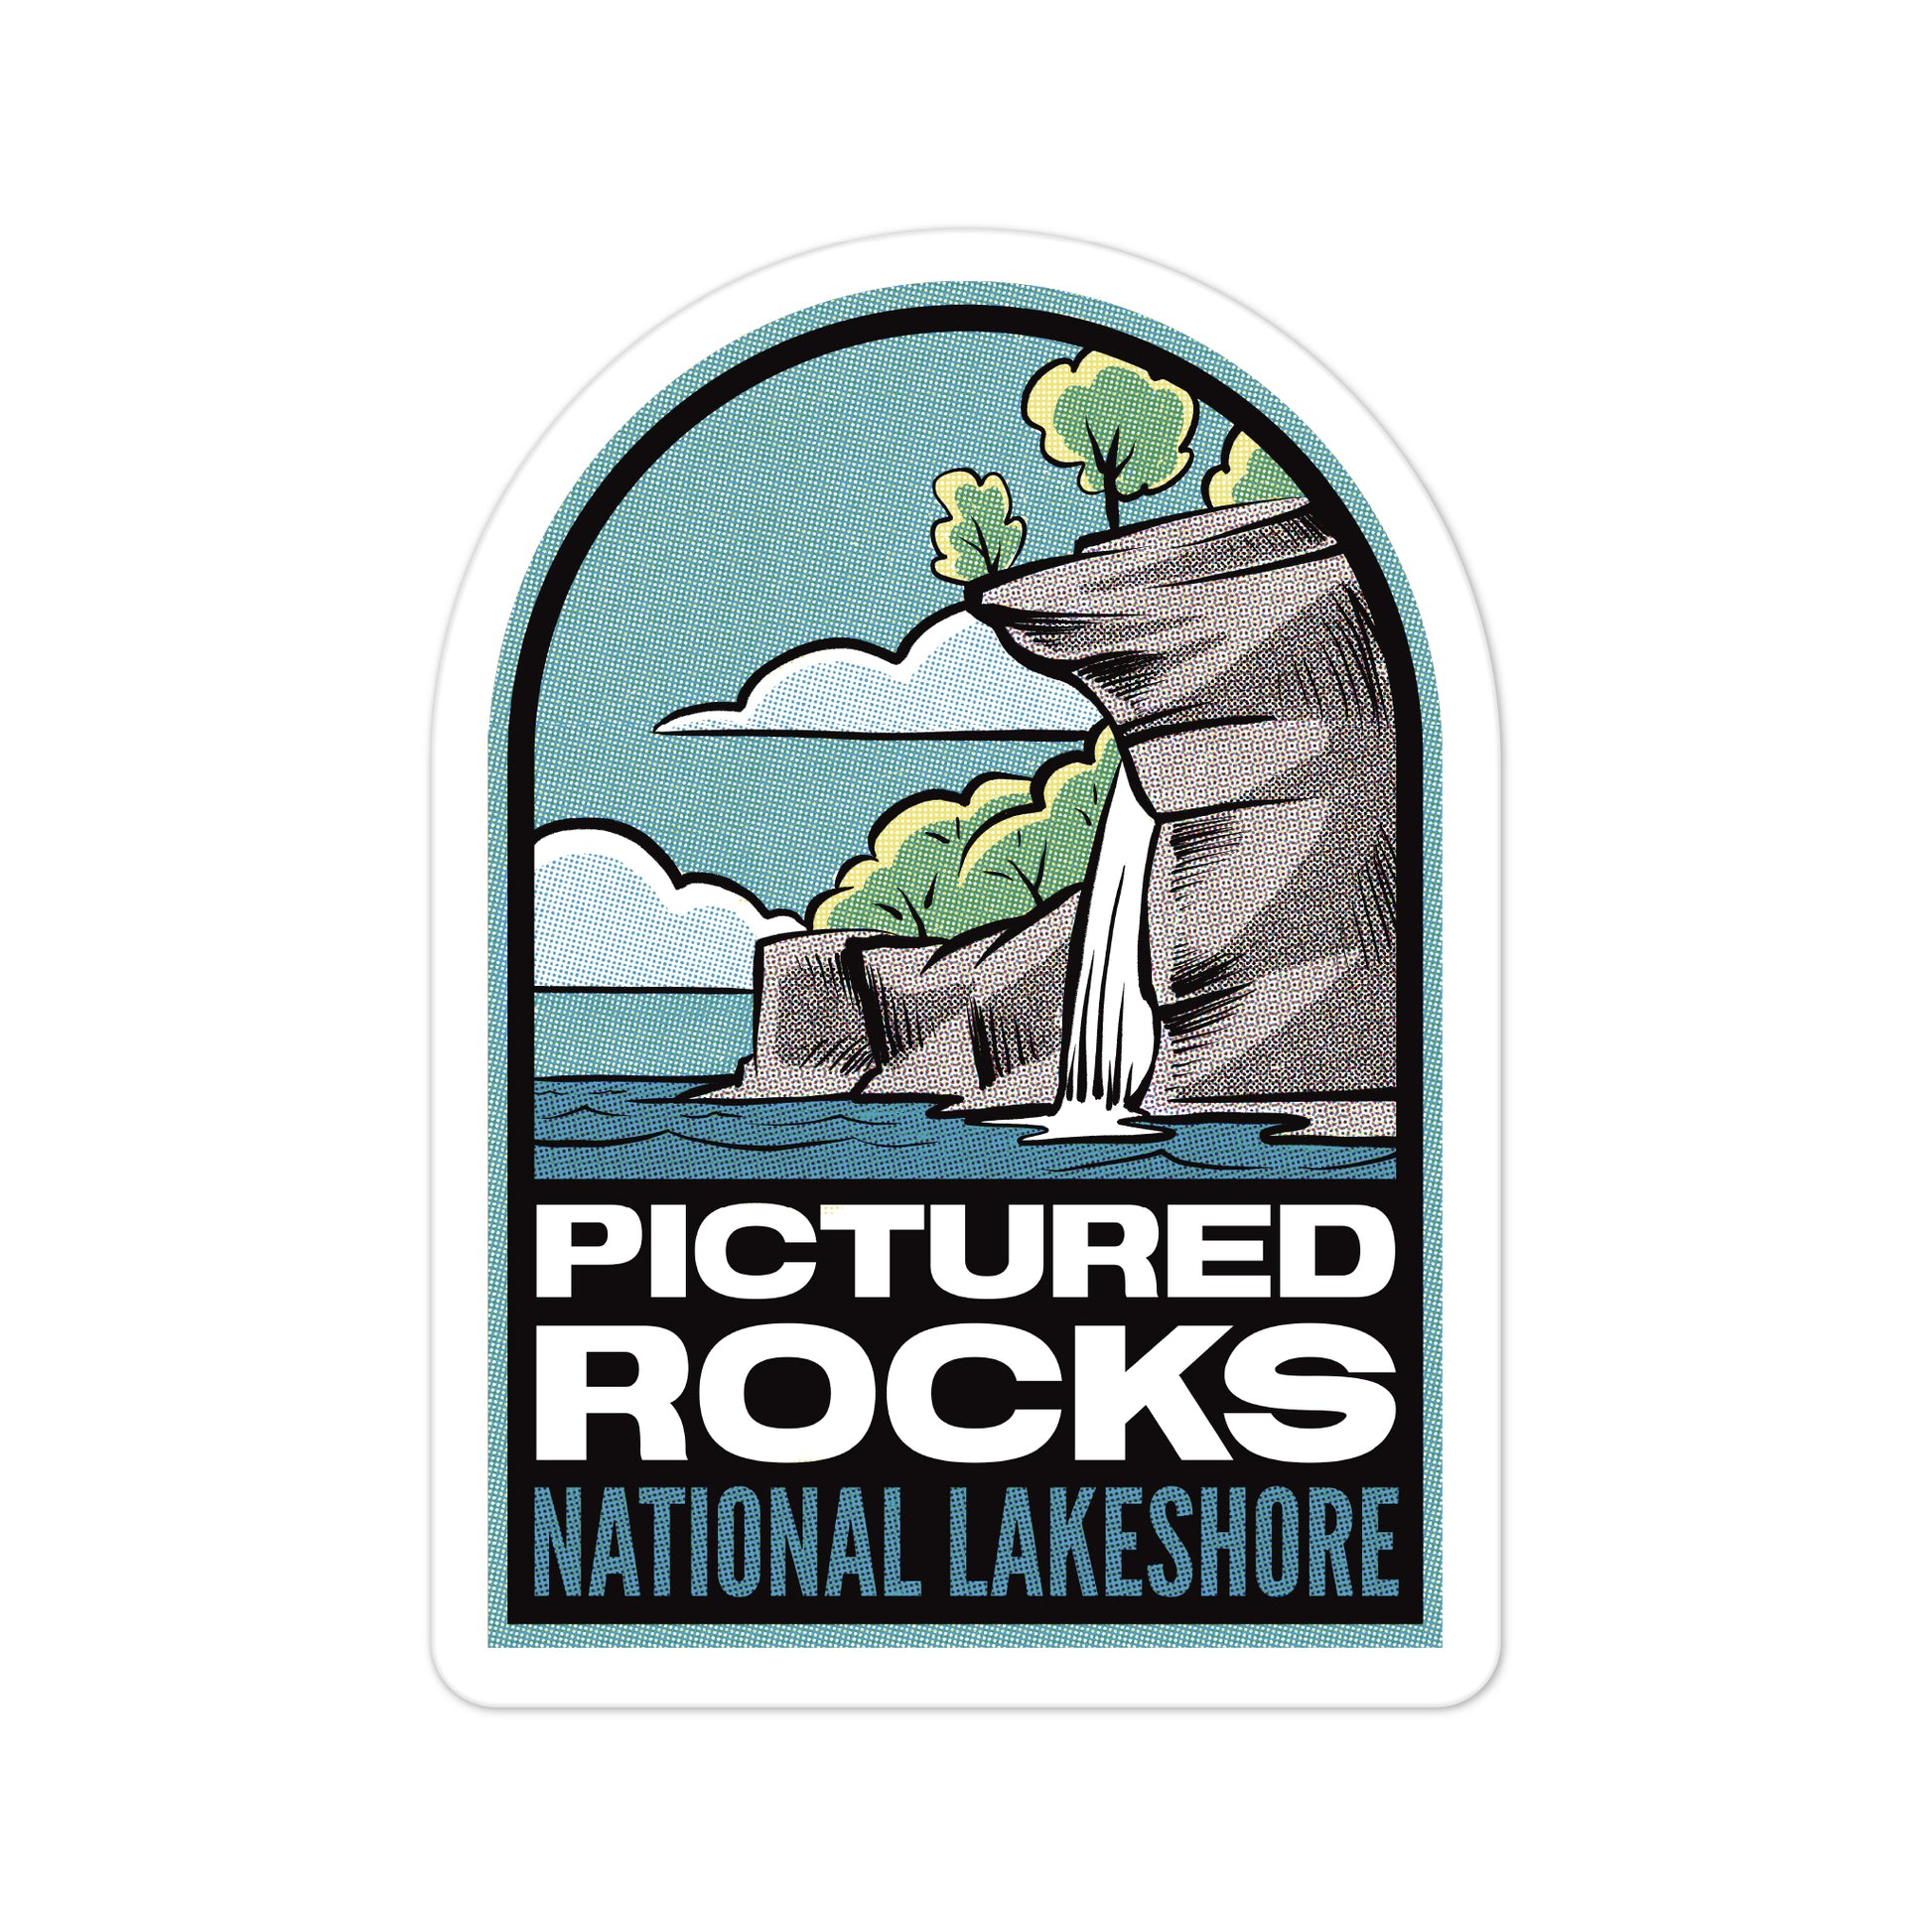 A sticker of PIctured Rocks National Lakeshore